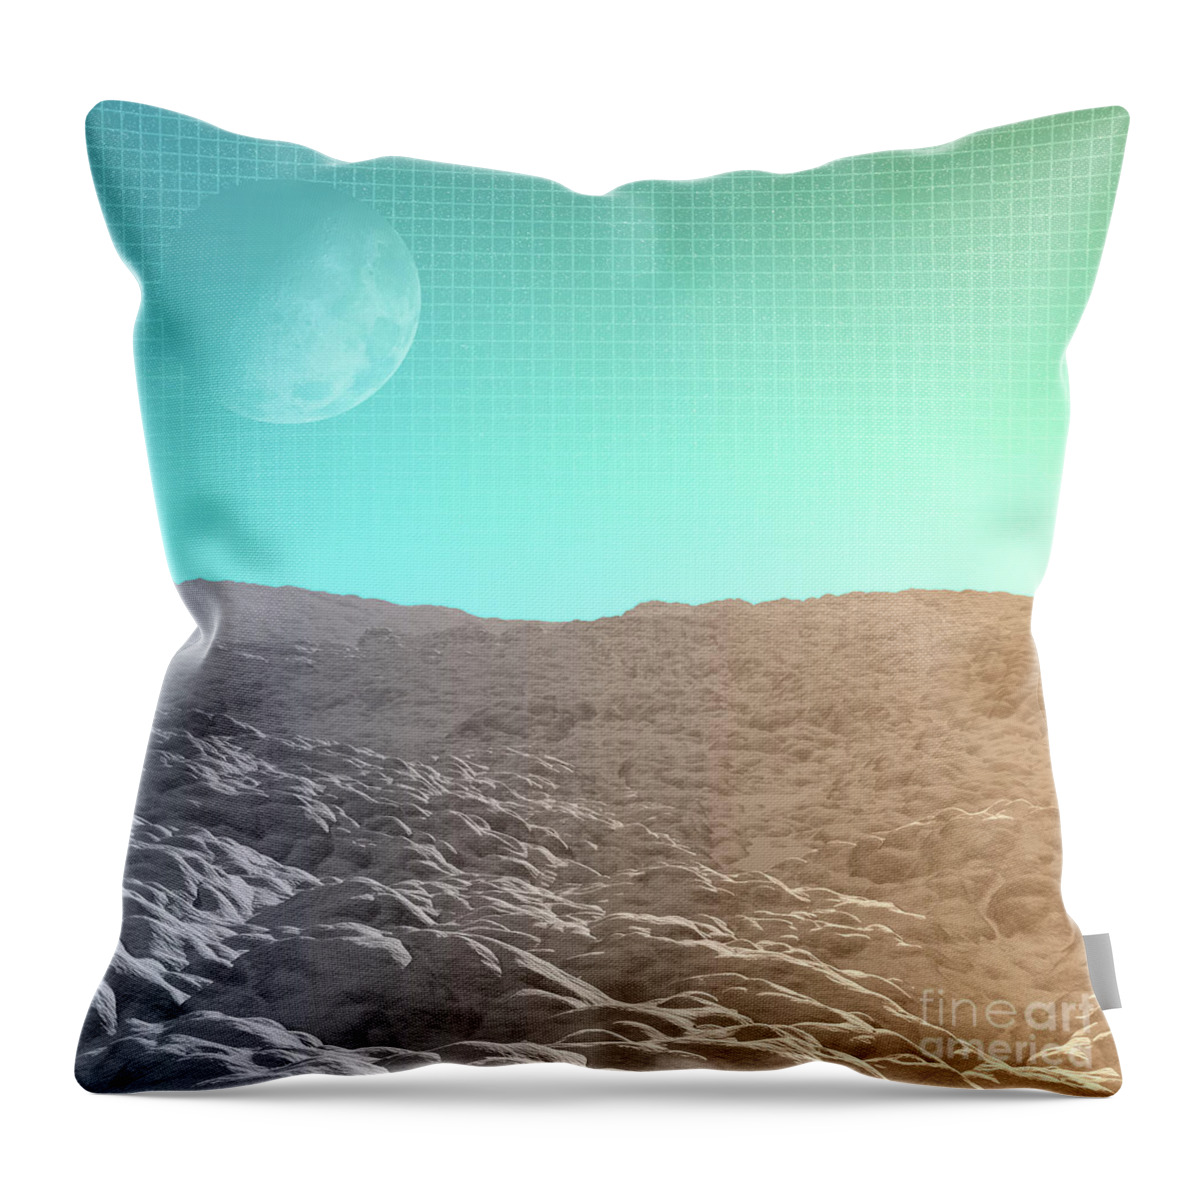 Moon Throw Pillow featuring the digital art Daylight In The Desert by Phil Perkins